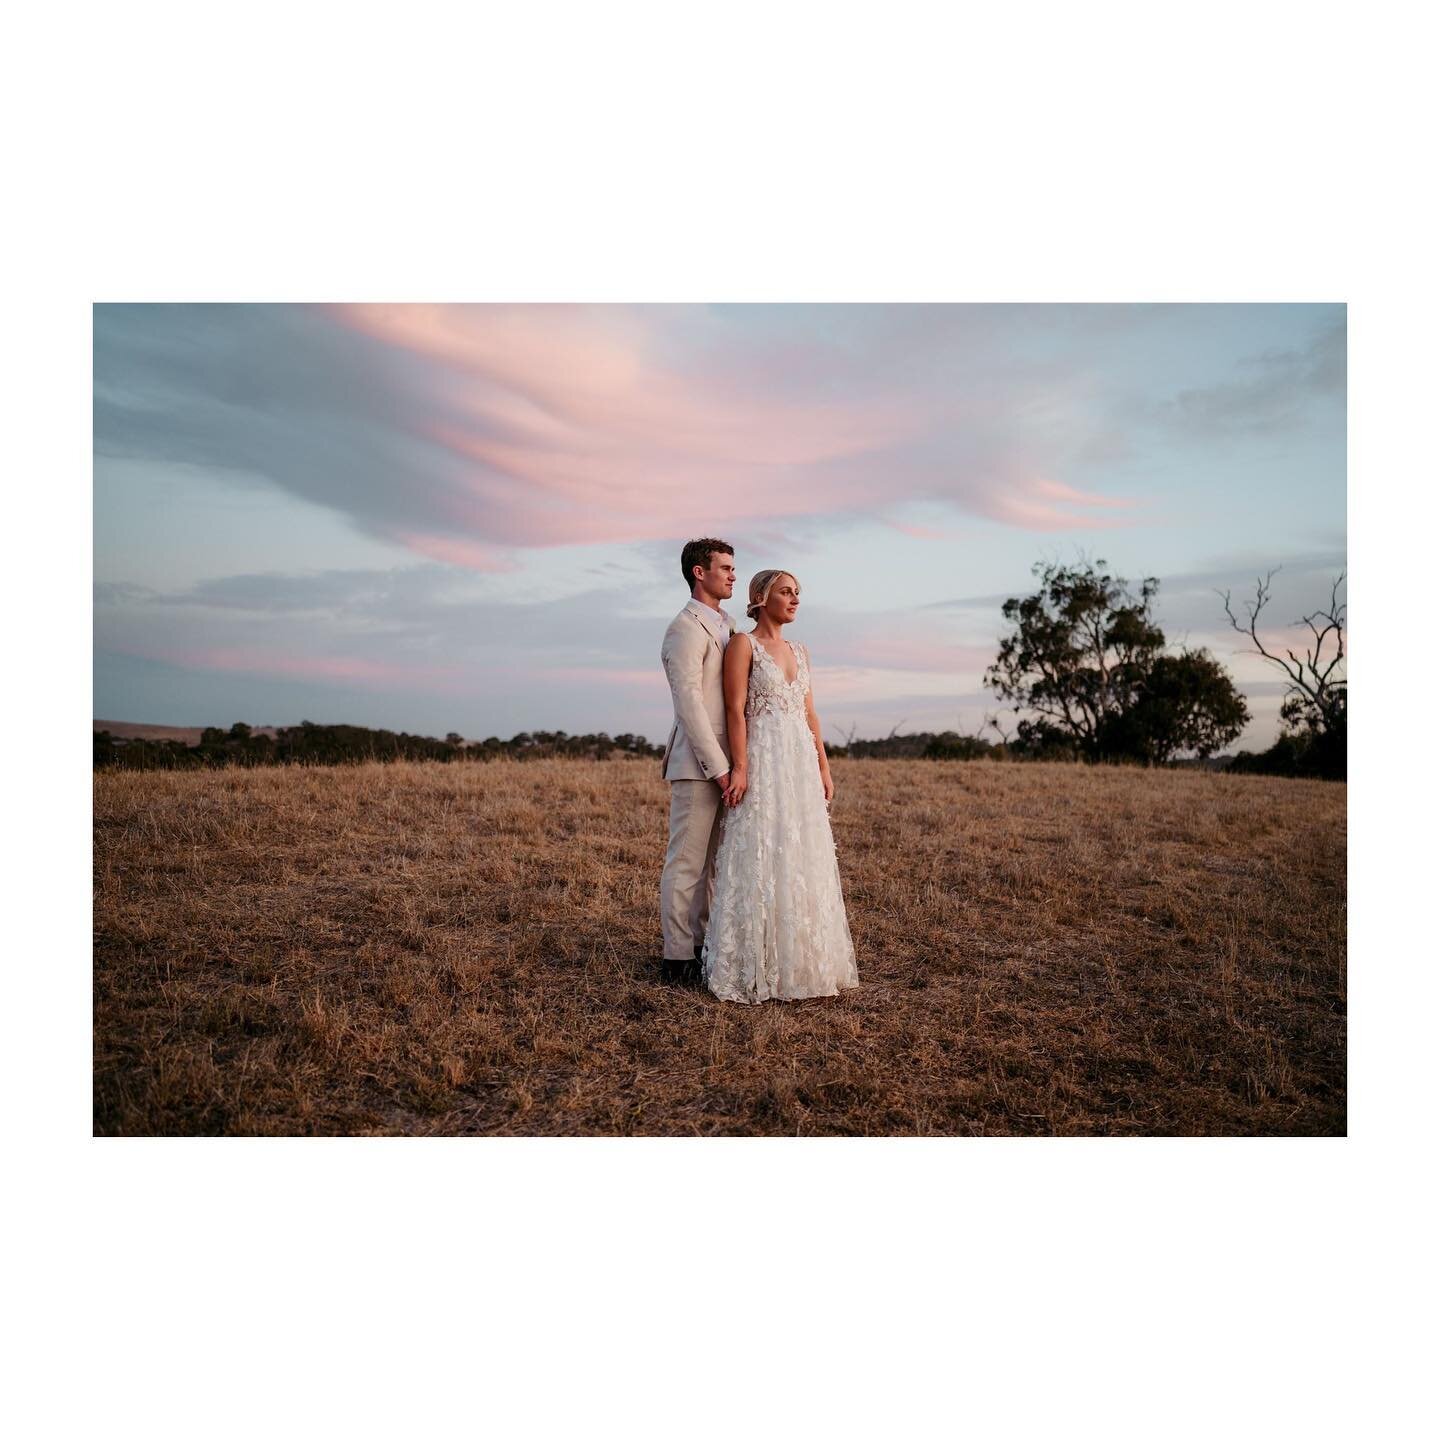 Pale blue might be my new favourite. Georgia &amp; Dylan the dreamboats from the weekend.

@closclarewines
@theclarevalleyeventsco
@nicole_habenschuss
@entertainmentadelaide
@kt_weddings
@the_film_room
@theweddingbroadcast 

.
.
.
.
.
.

#adelaidewed